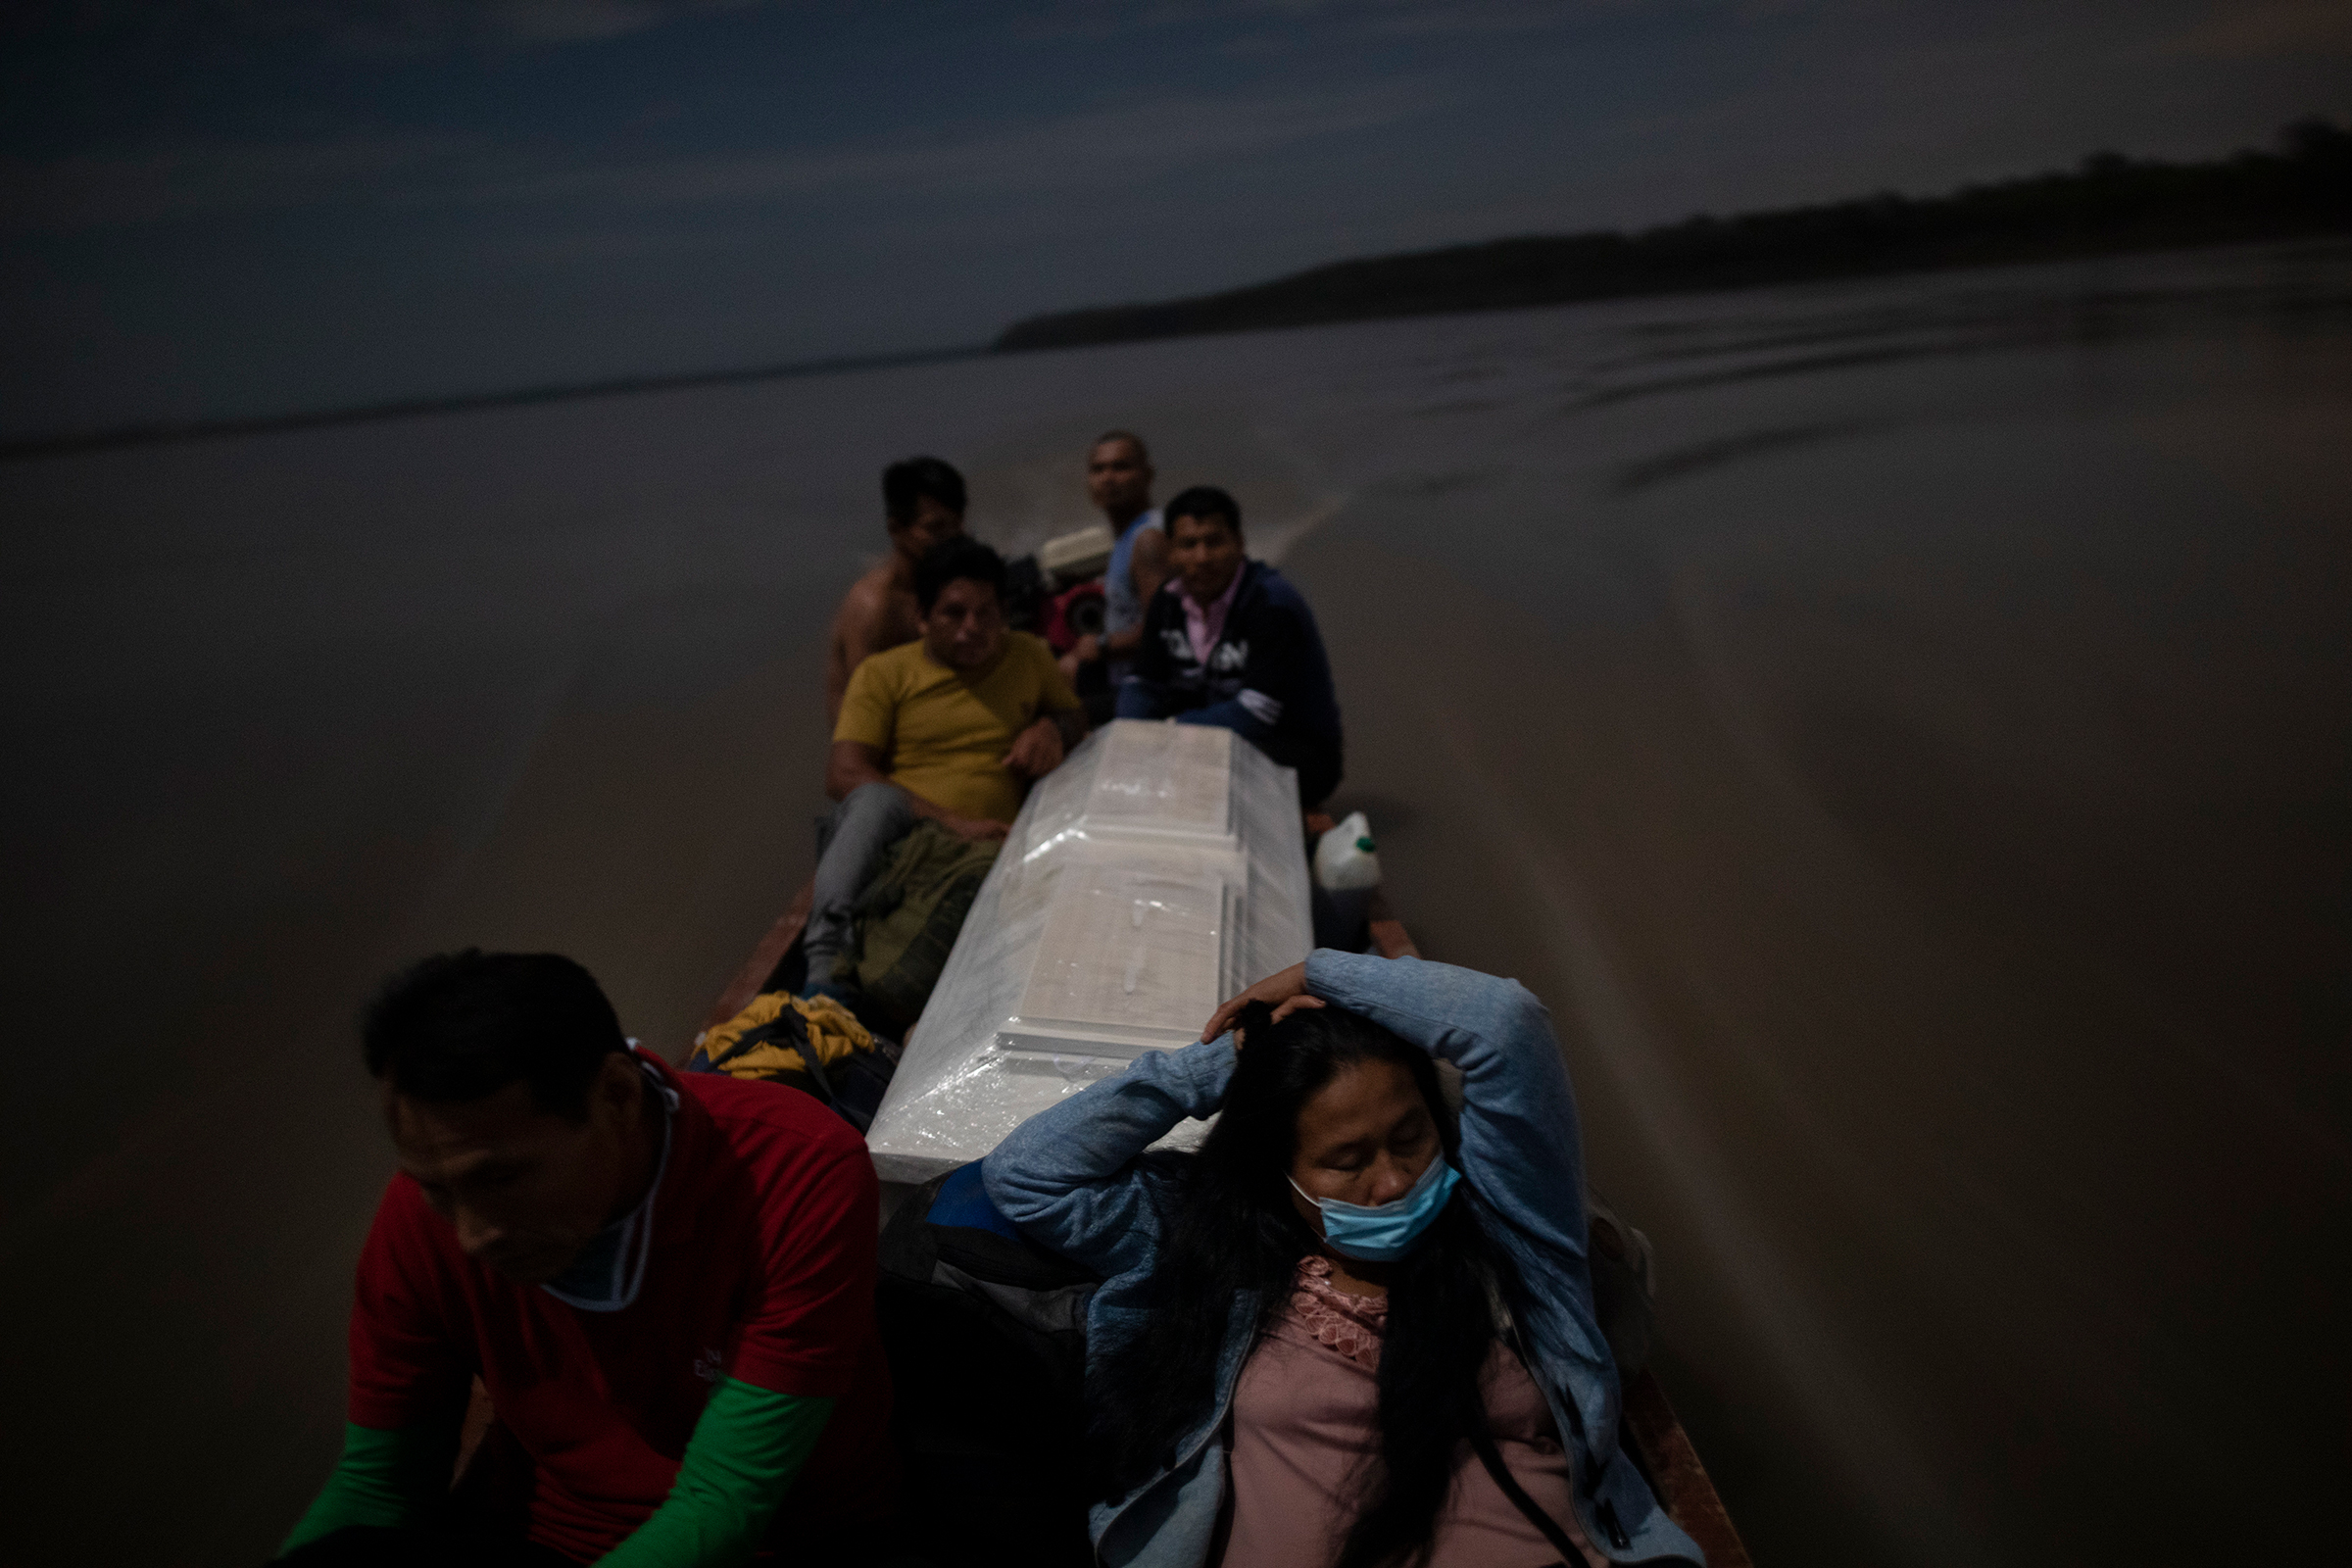 Relatives accompany the coffin of Jose Barbaran, who was believed to have died from coronavirus complications, as they travel by boat on Peru's Ucayali River on Sept. 29. Despite the risk, family members decided to travel by night to Barbaran's hometown of Palestina, a four-hour journey. (Rodrigo Abd—AP)